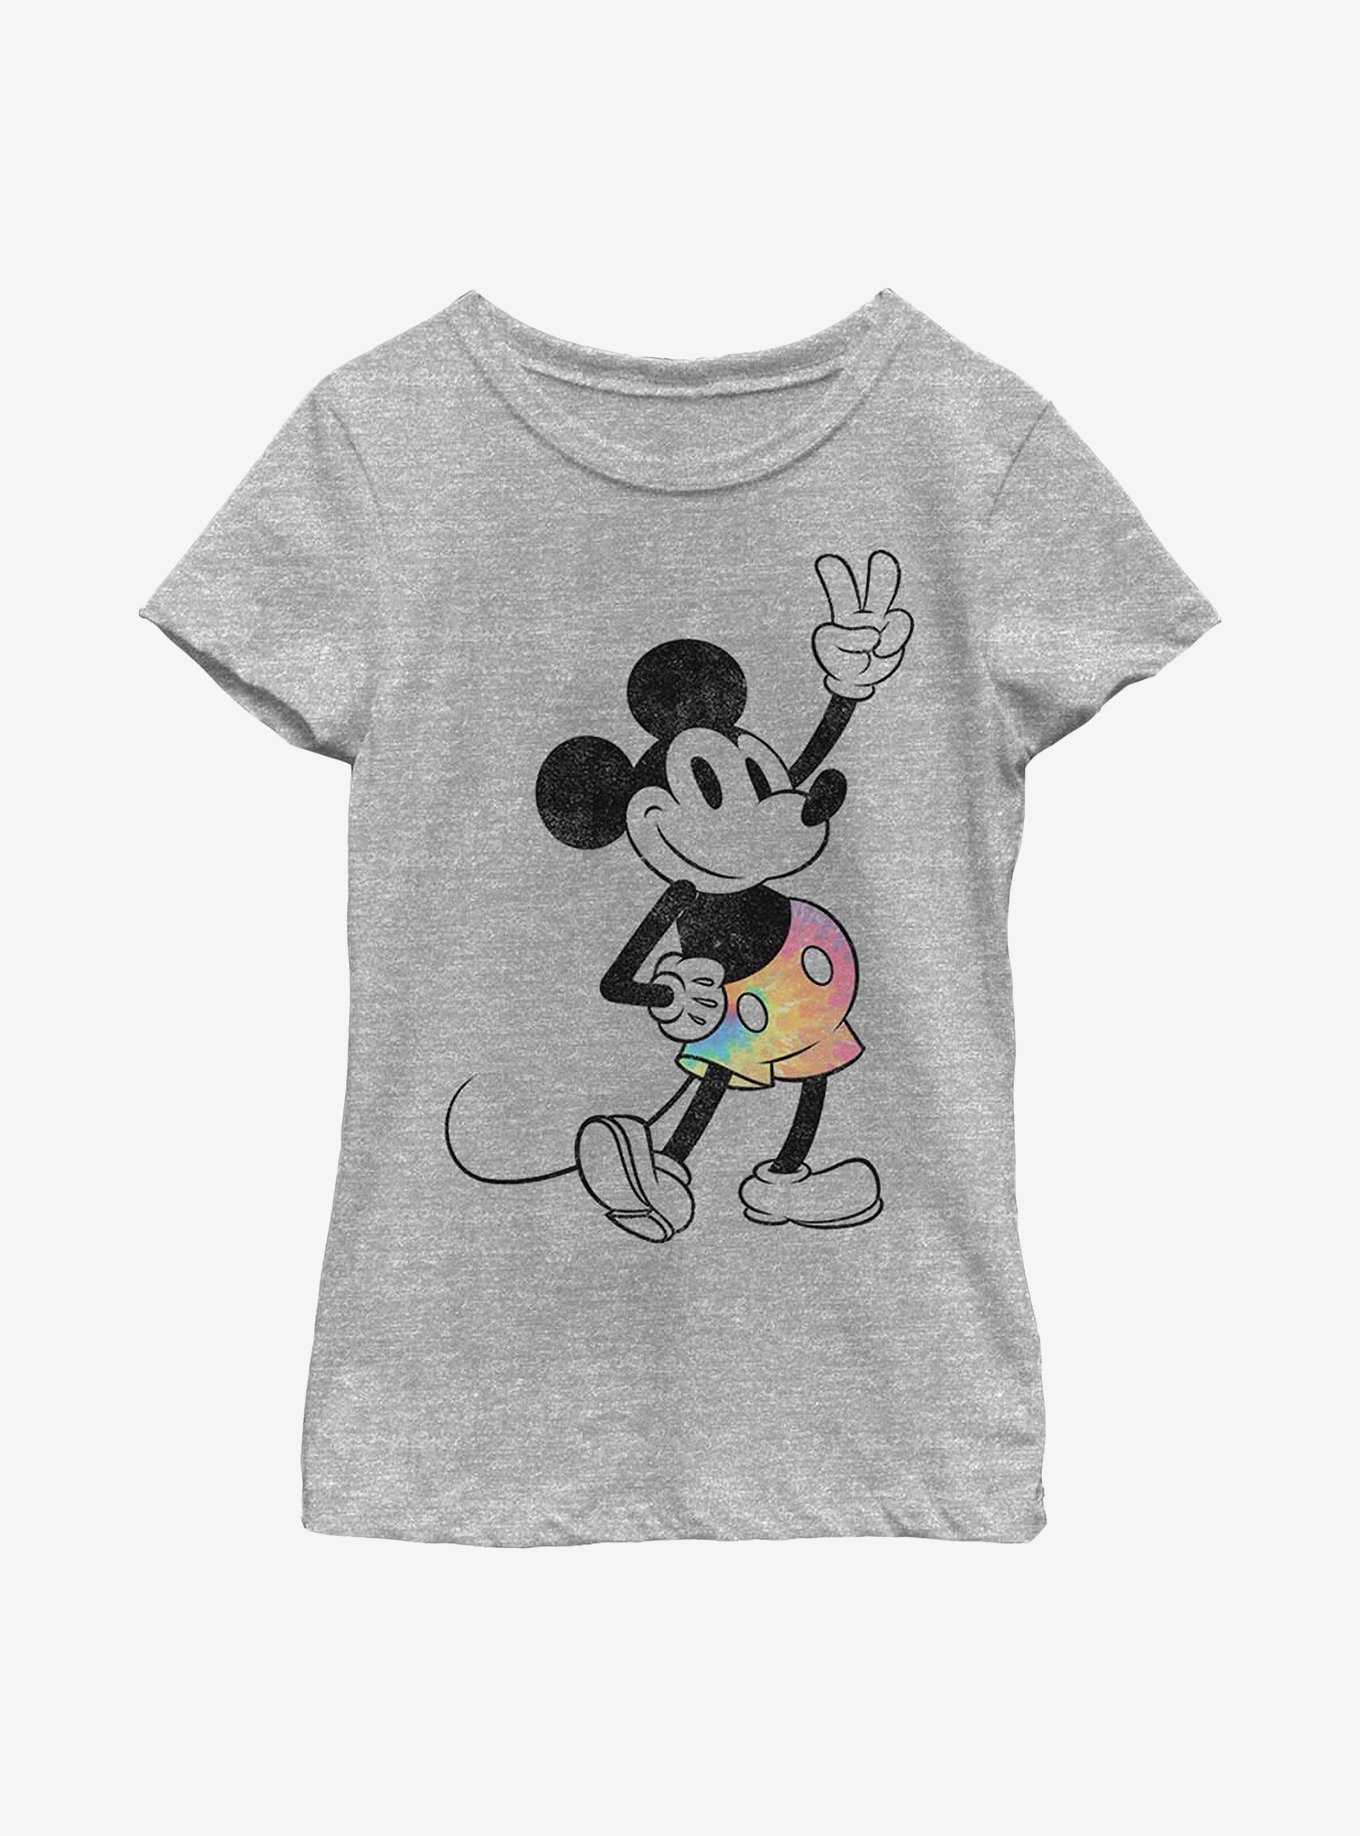 Disney Mickey Mouse Tie Dye Mickey Youth Girls T-Shirt, , hi-res